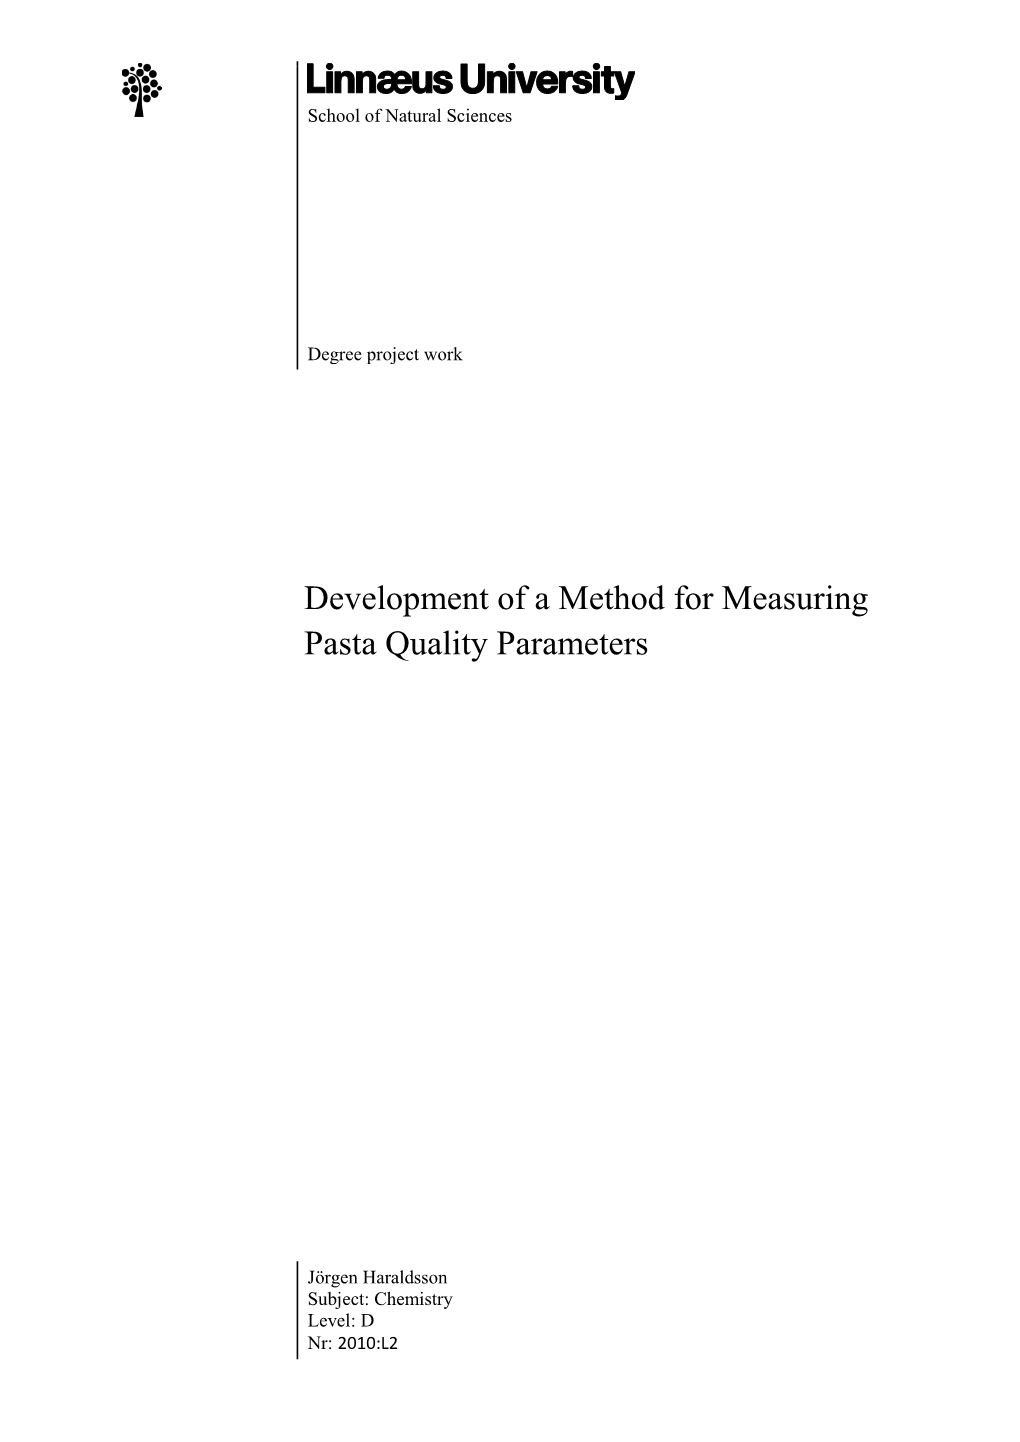 Development of a Method for Measuring Pasta Quality Parameters